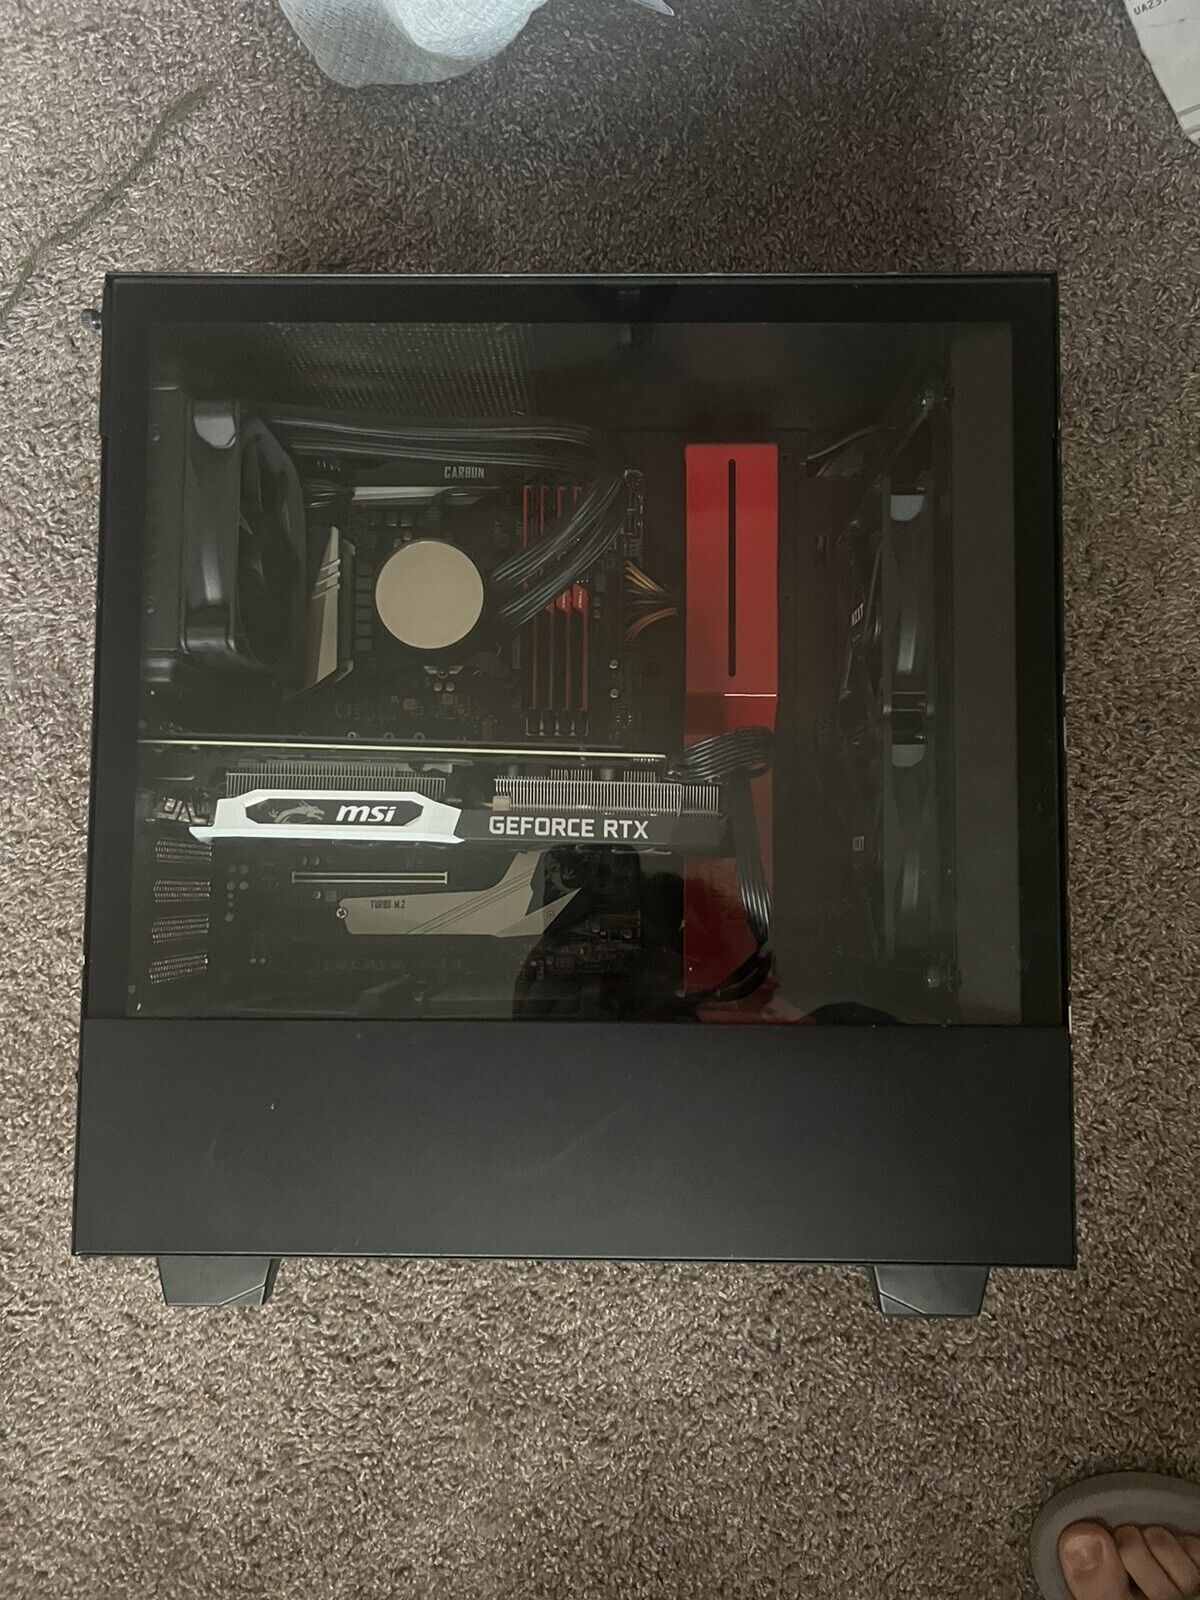 gaming pc used Rtx 2070, Msi Mpg Z390, NZXT Build, 32 GB DDR4 Ram